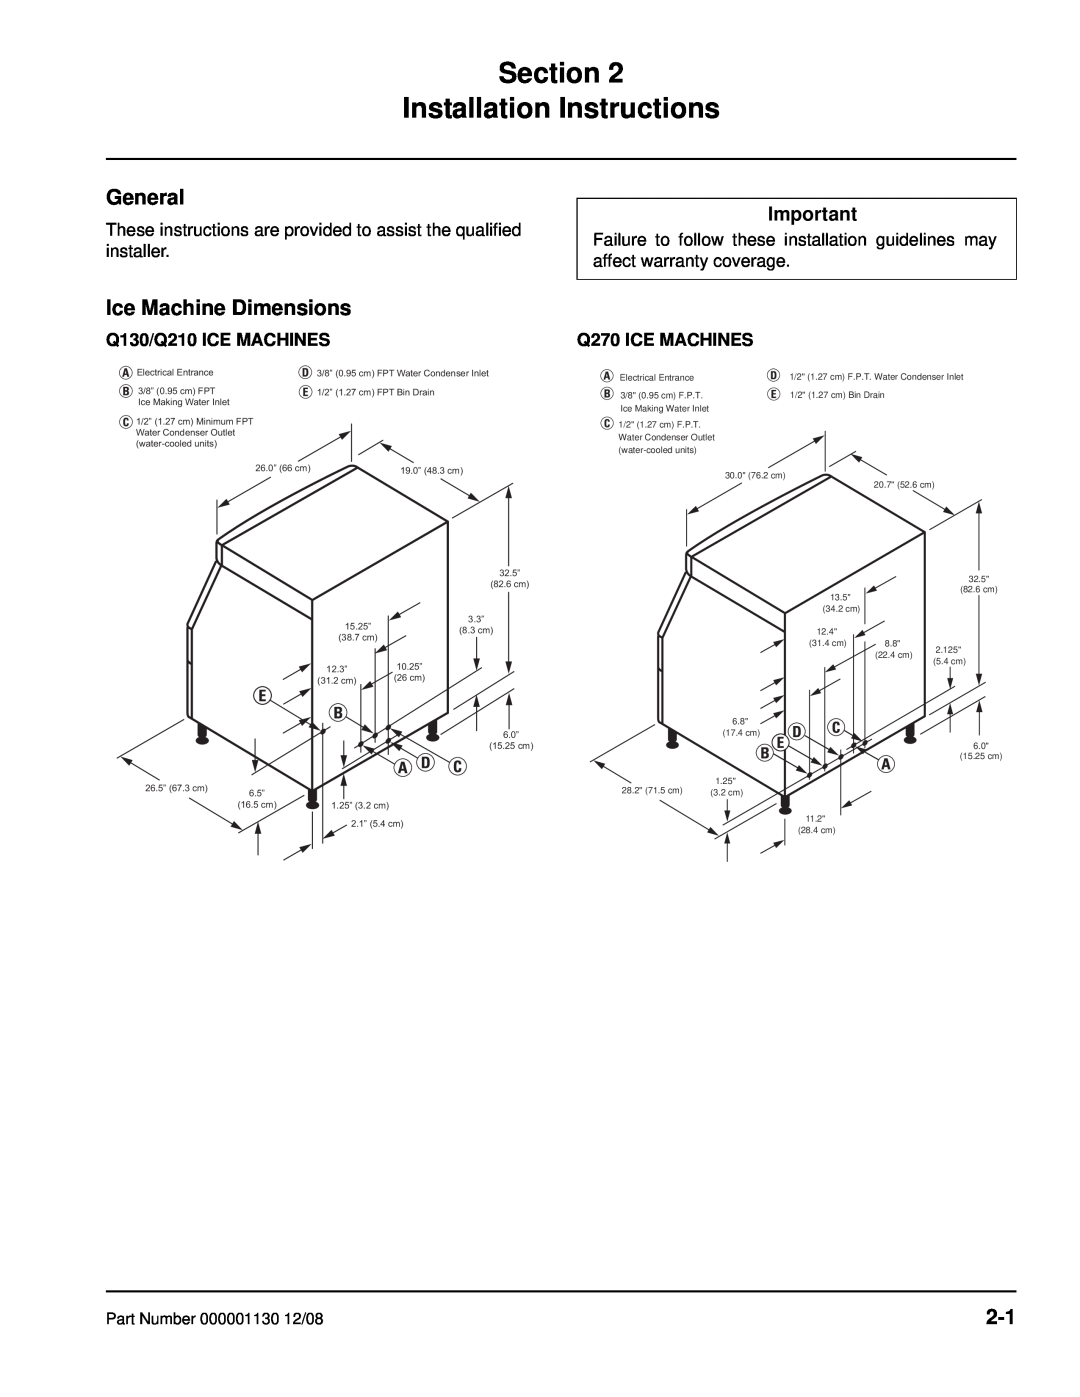 Manitowoc Ice manual Section Installation Instructions, General, Ice Machine Dimensions, Q130/Q210 ICE MACHINES 